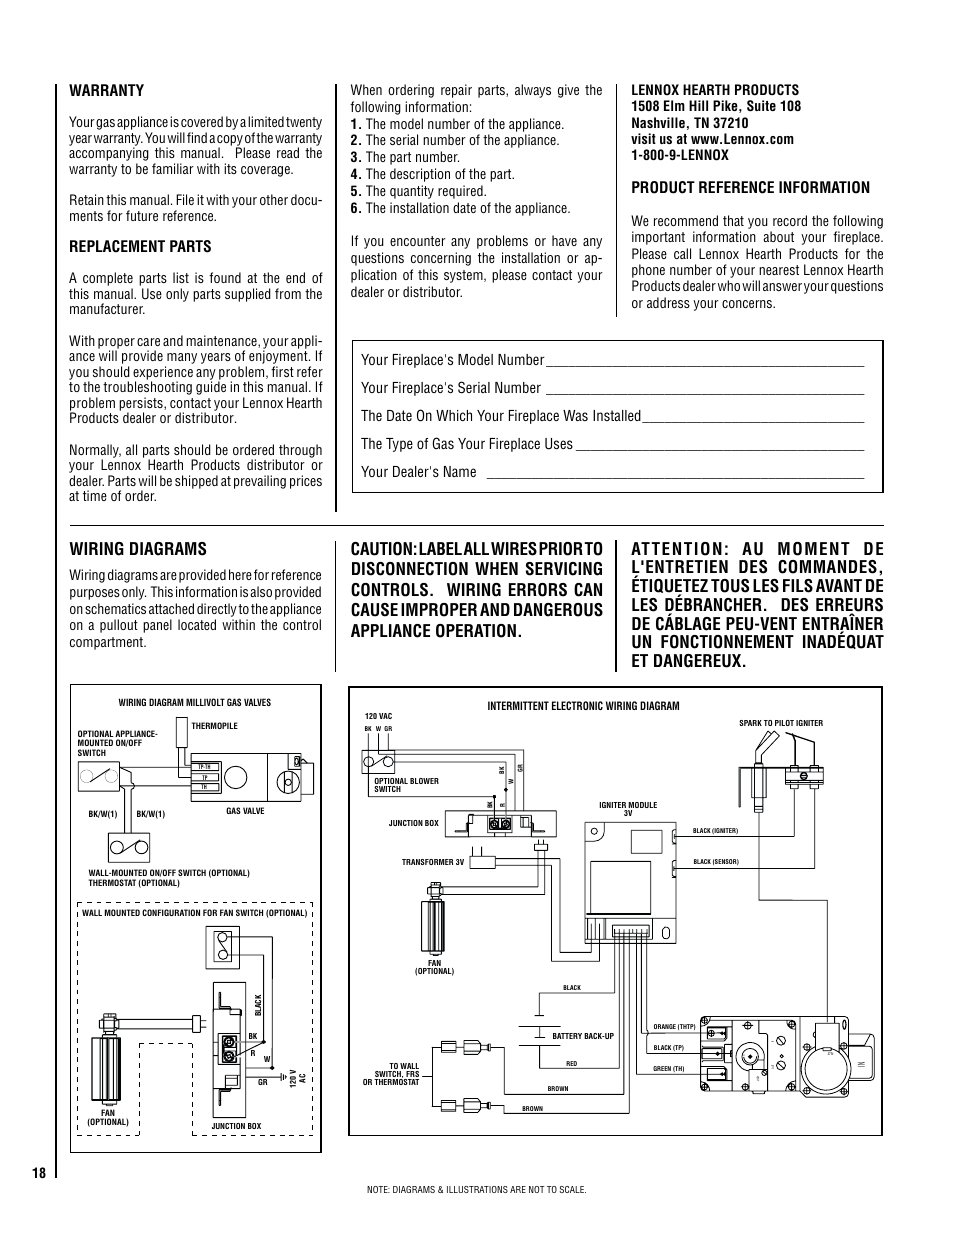 Wiring Diagrams  Warranty  Replacement Parts